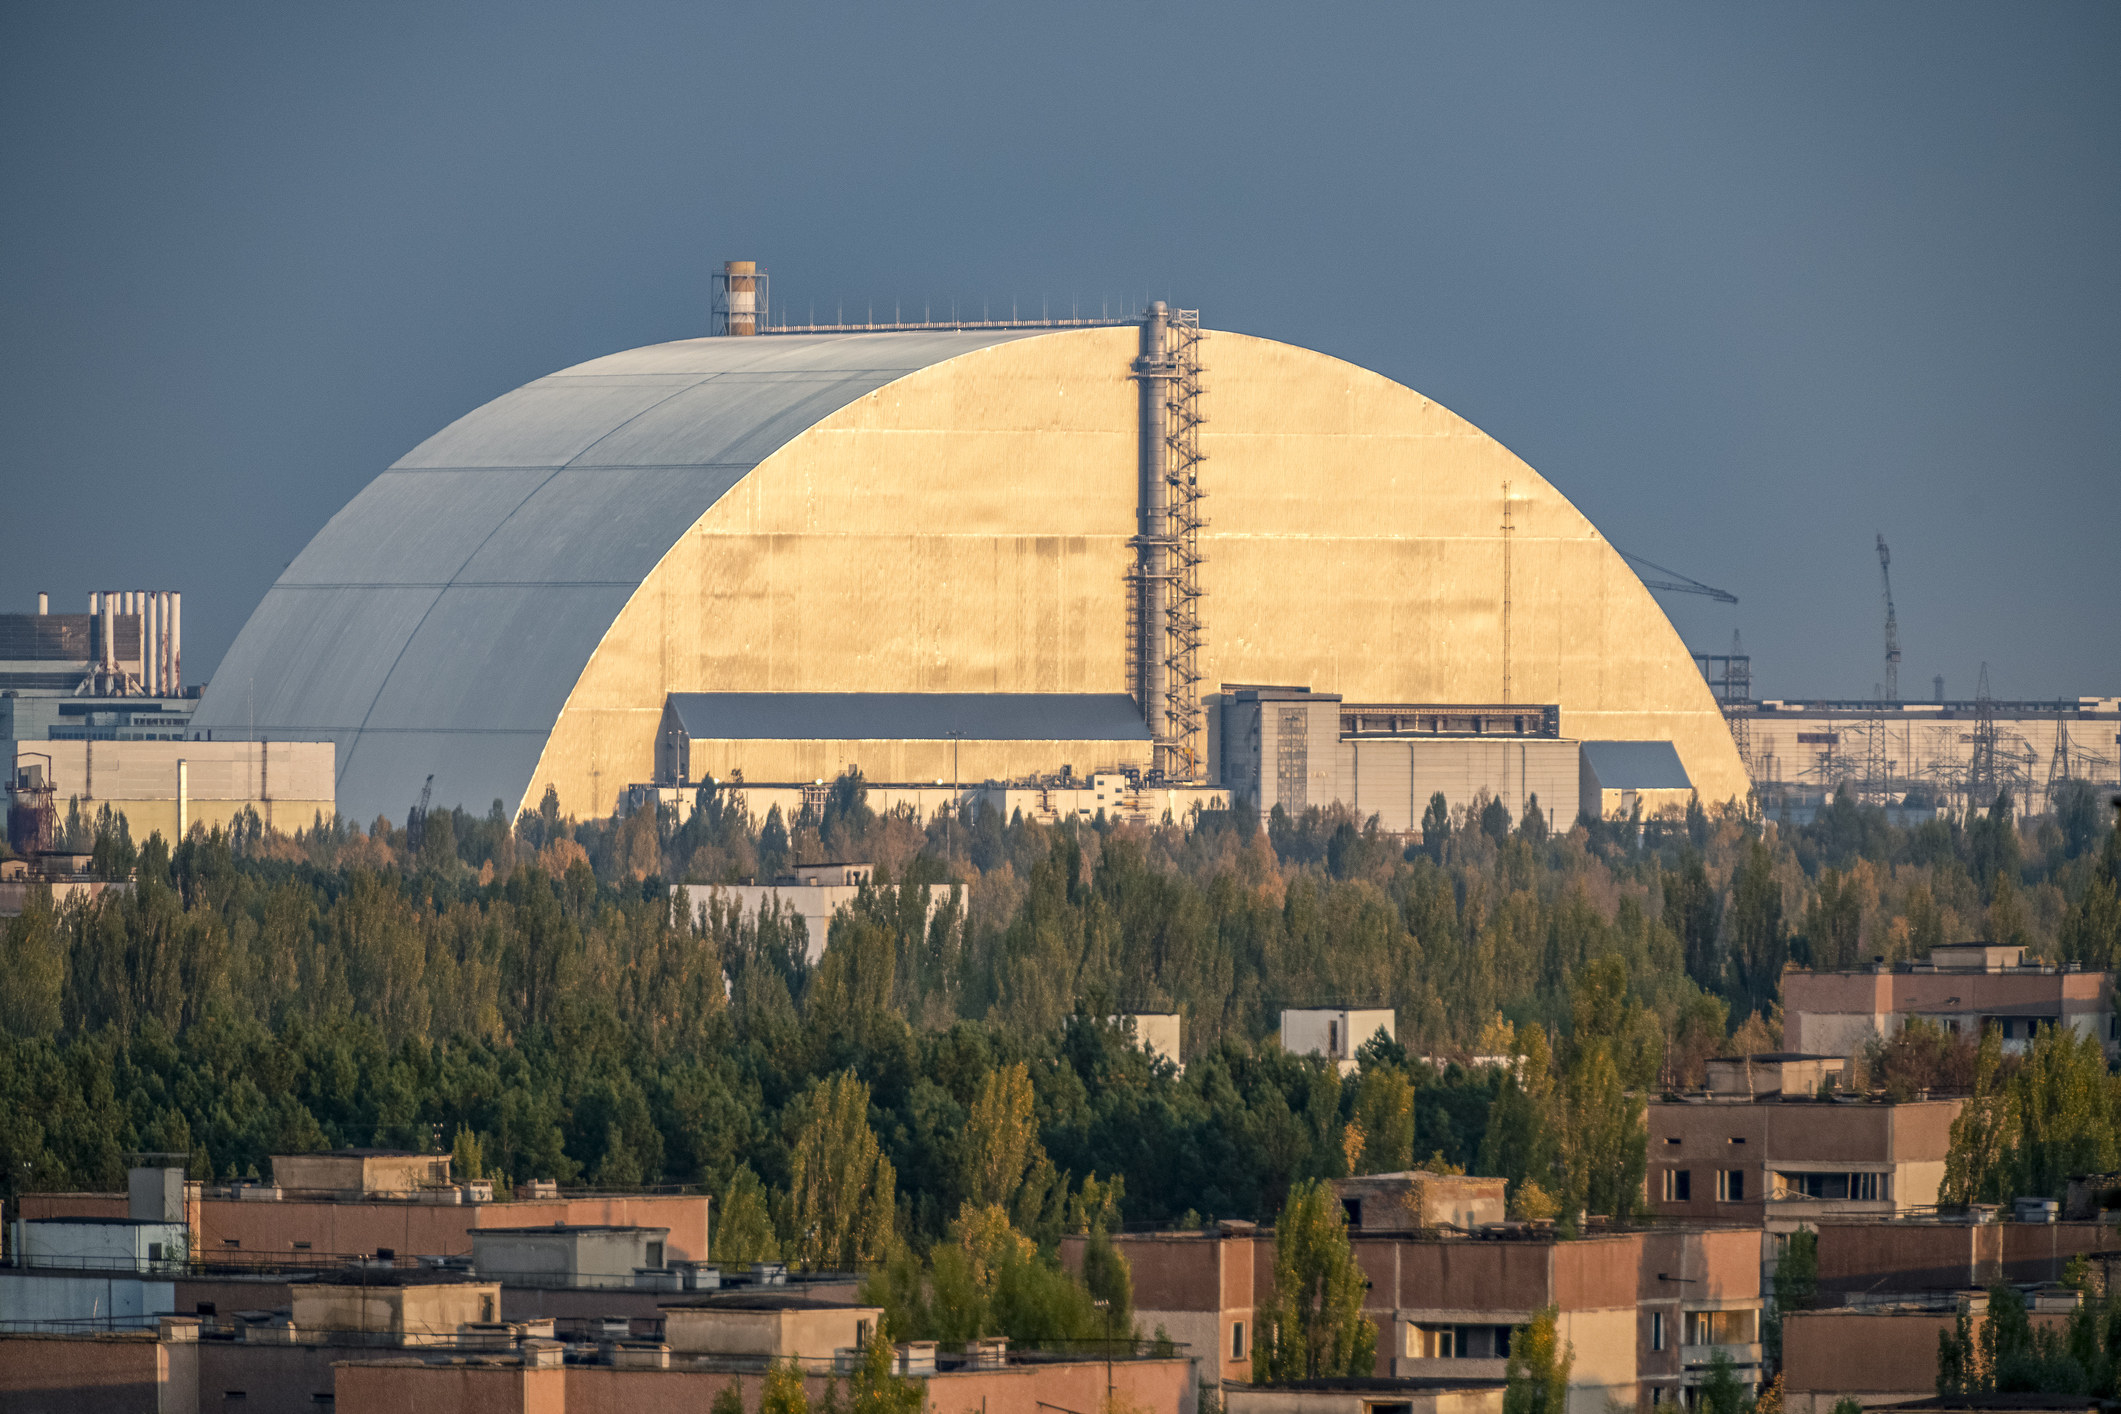 A large dome-like structure looming large in a semi-industrial and semi-residential landscape